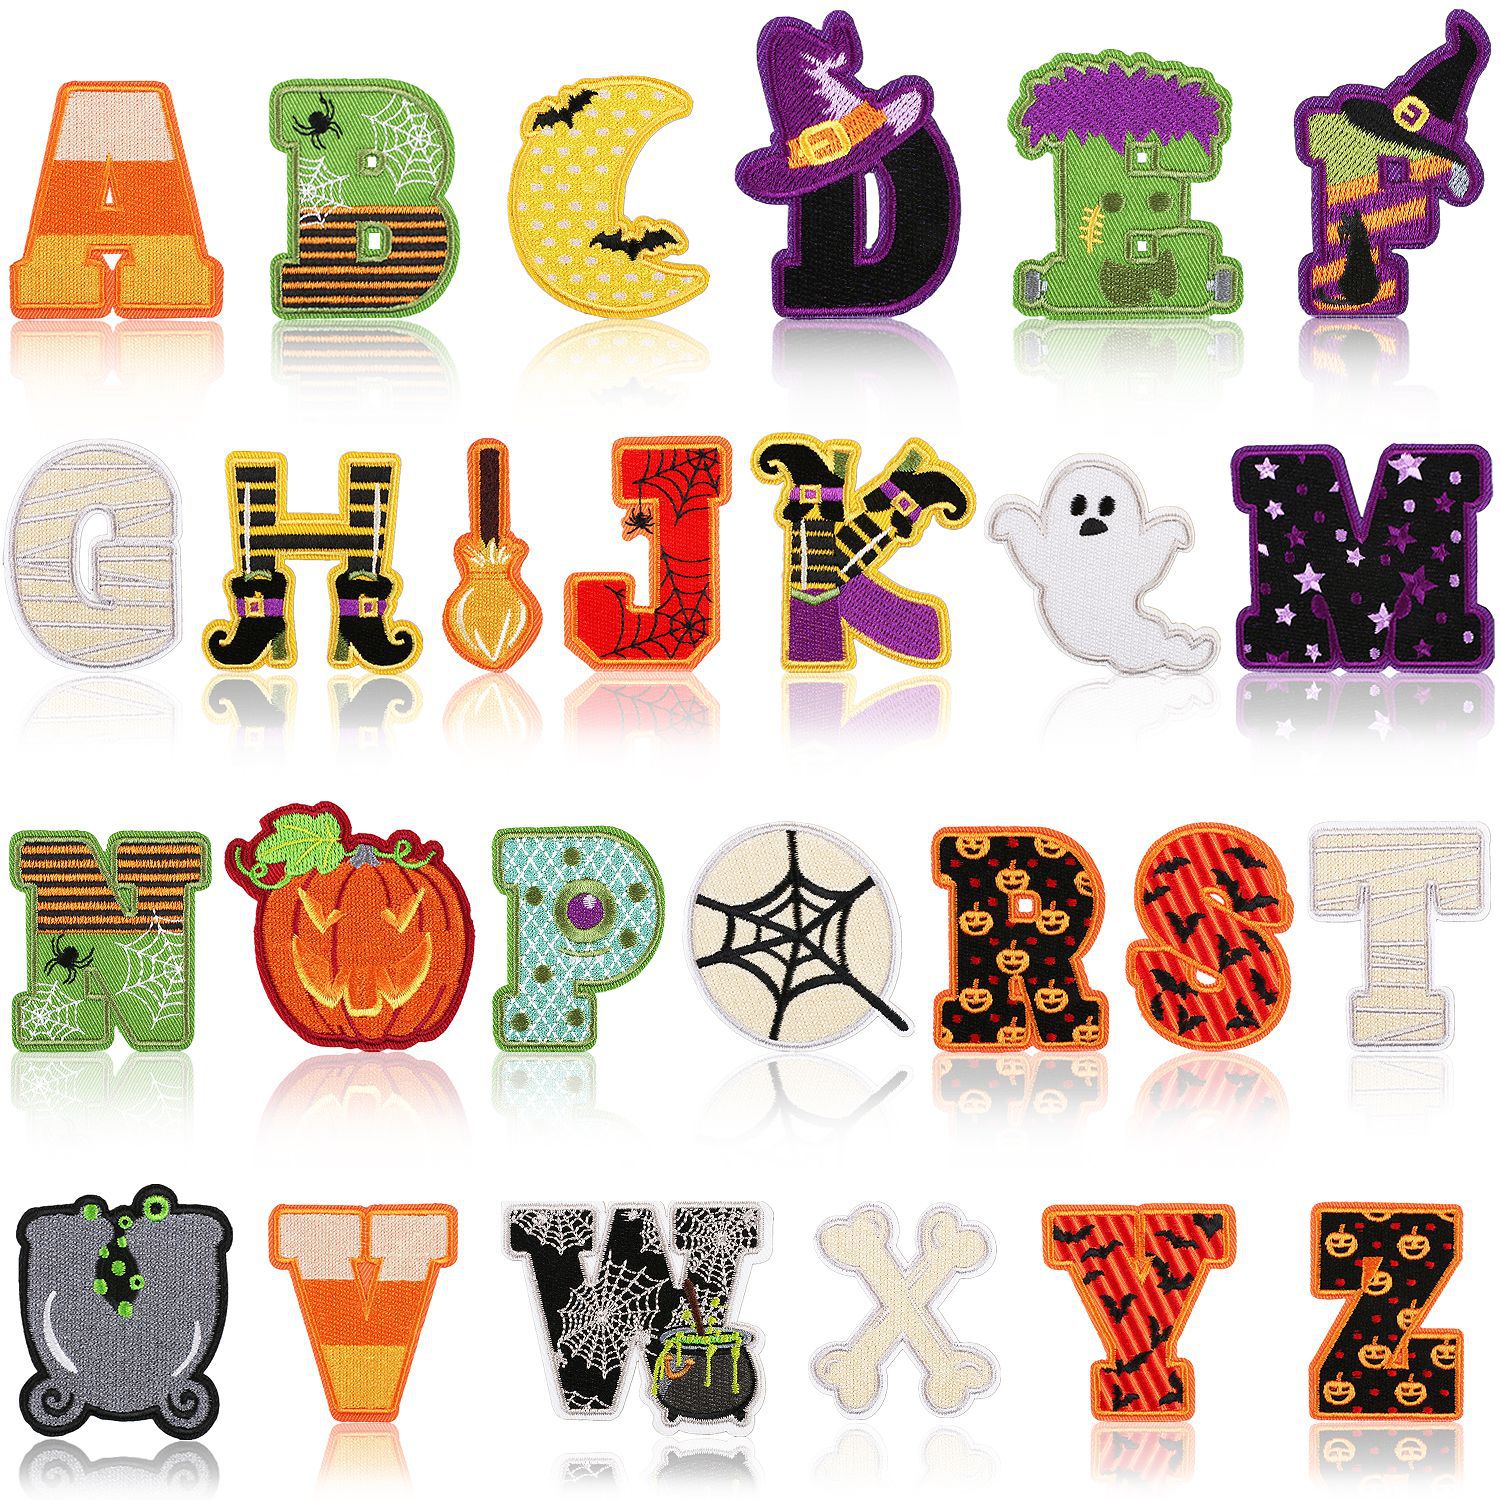 Notions Cute Halloween Iron on Patches Ghost Bat Spider Shape Letters Patch Cartoon Embroidered Applique DIY Craft Accessories for Kids Halloween Costume Clothing